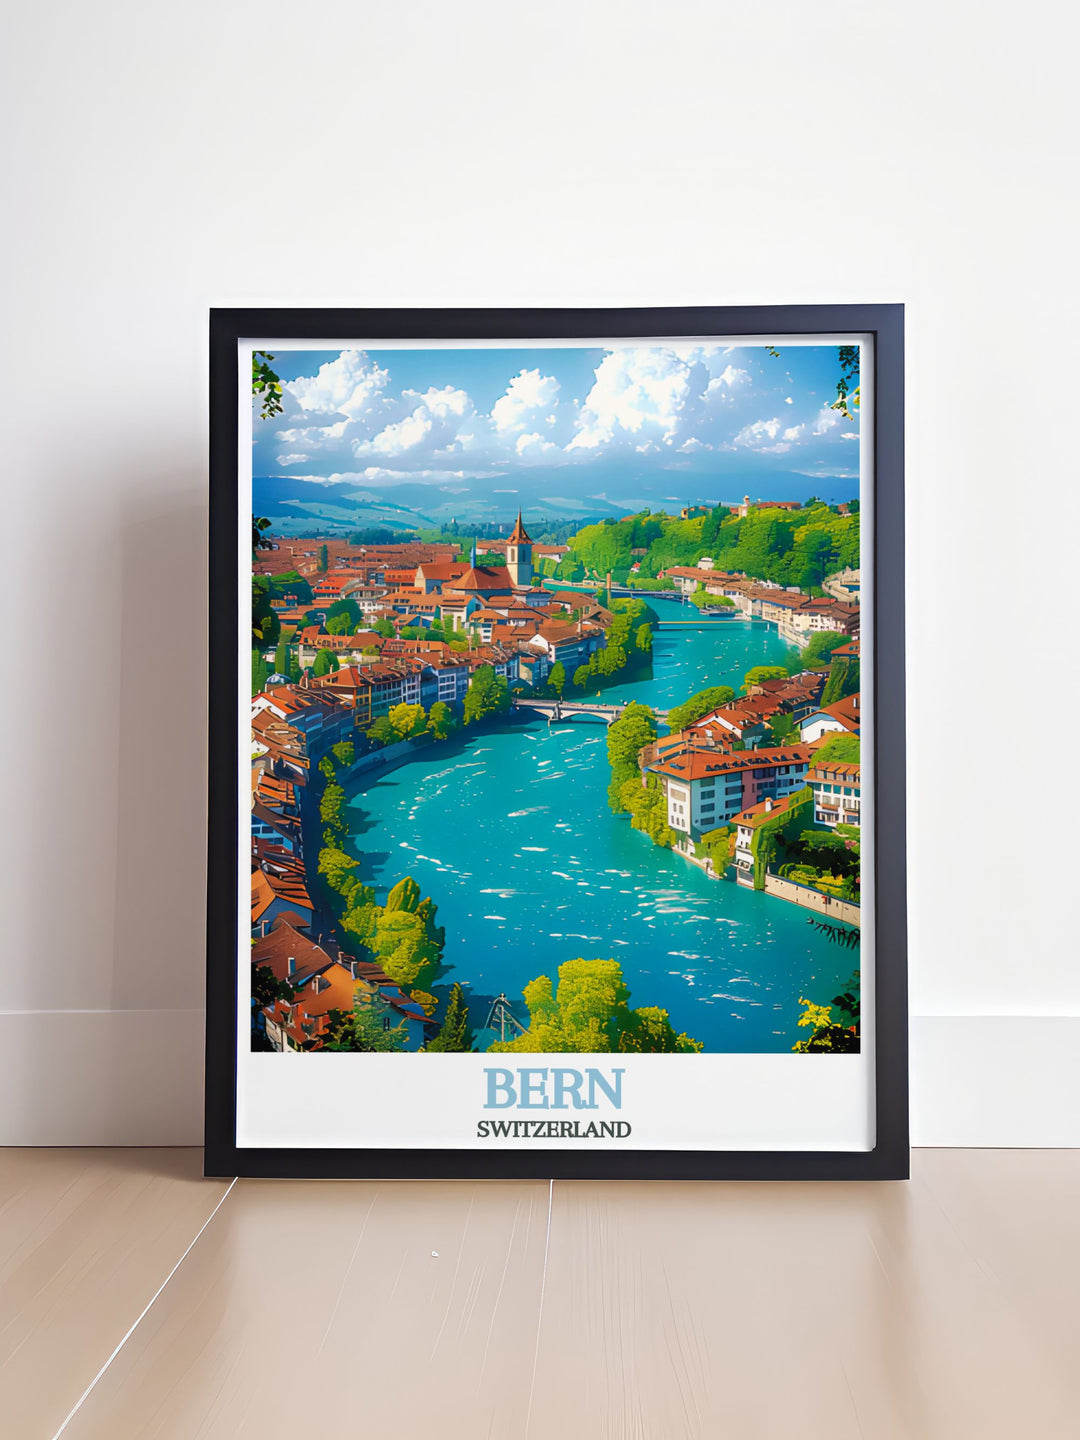 This vibrant travel poster showcases the stunning scenery of the Swiss Alps and the historic architecture of Bern, perfect for adding a touch of Switzerlands charm to your walls.